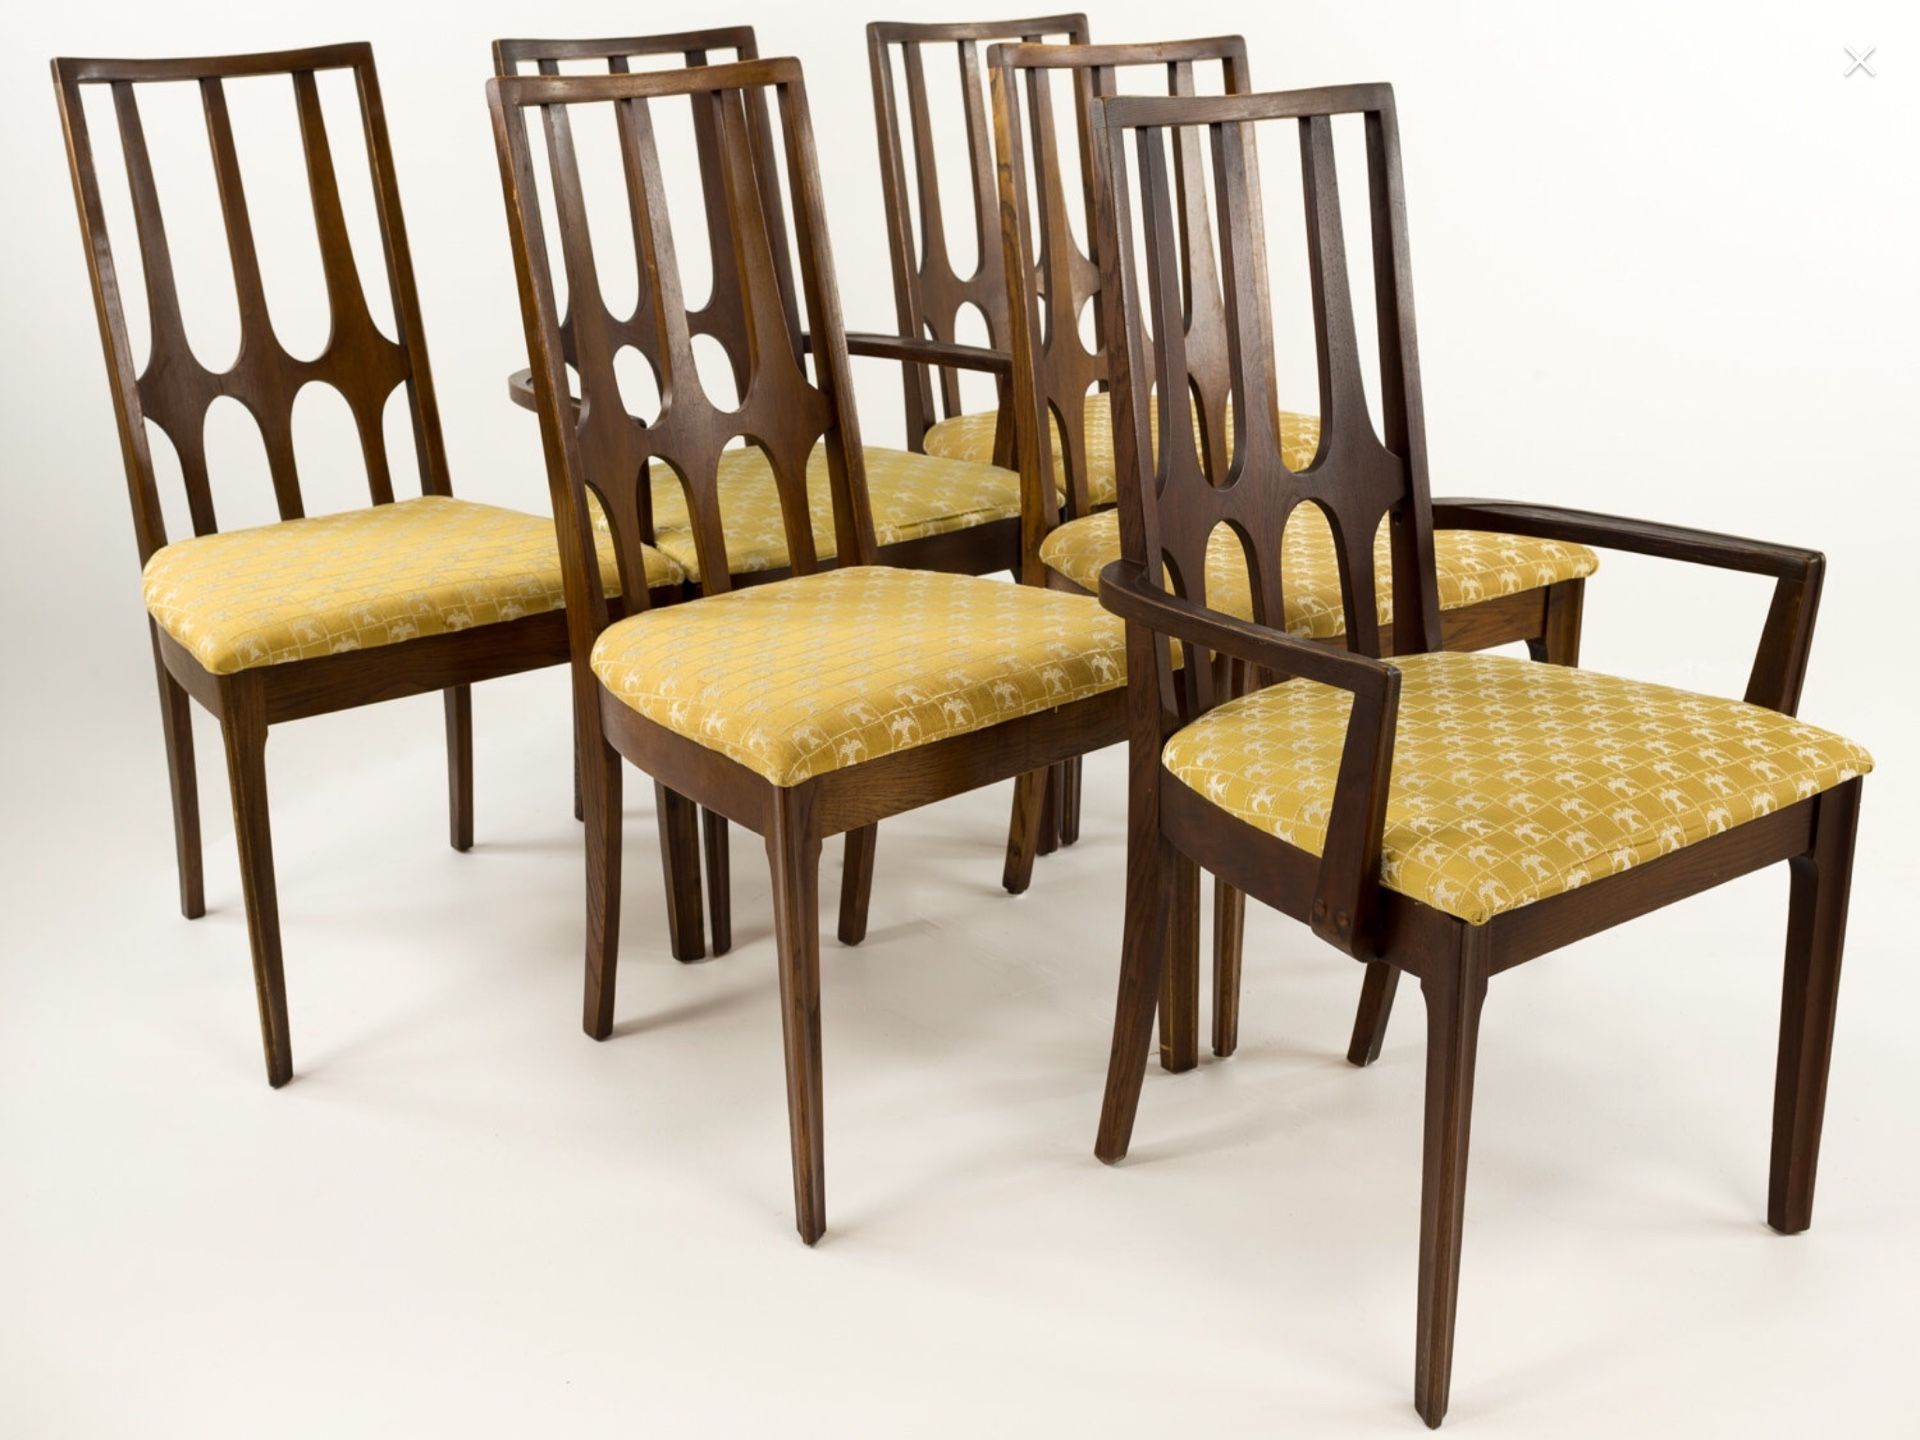 SET OF 6 MCM MID CENTURY MODERN BROYHILL BRASILIA CHAIRS AND FREE TABLE - SHIPPING AVAILABLE